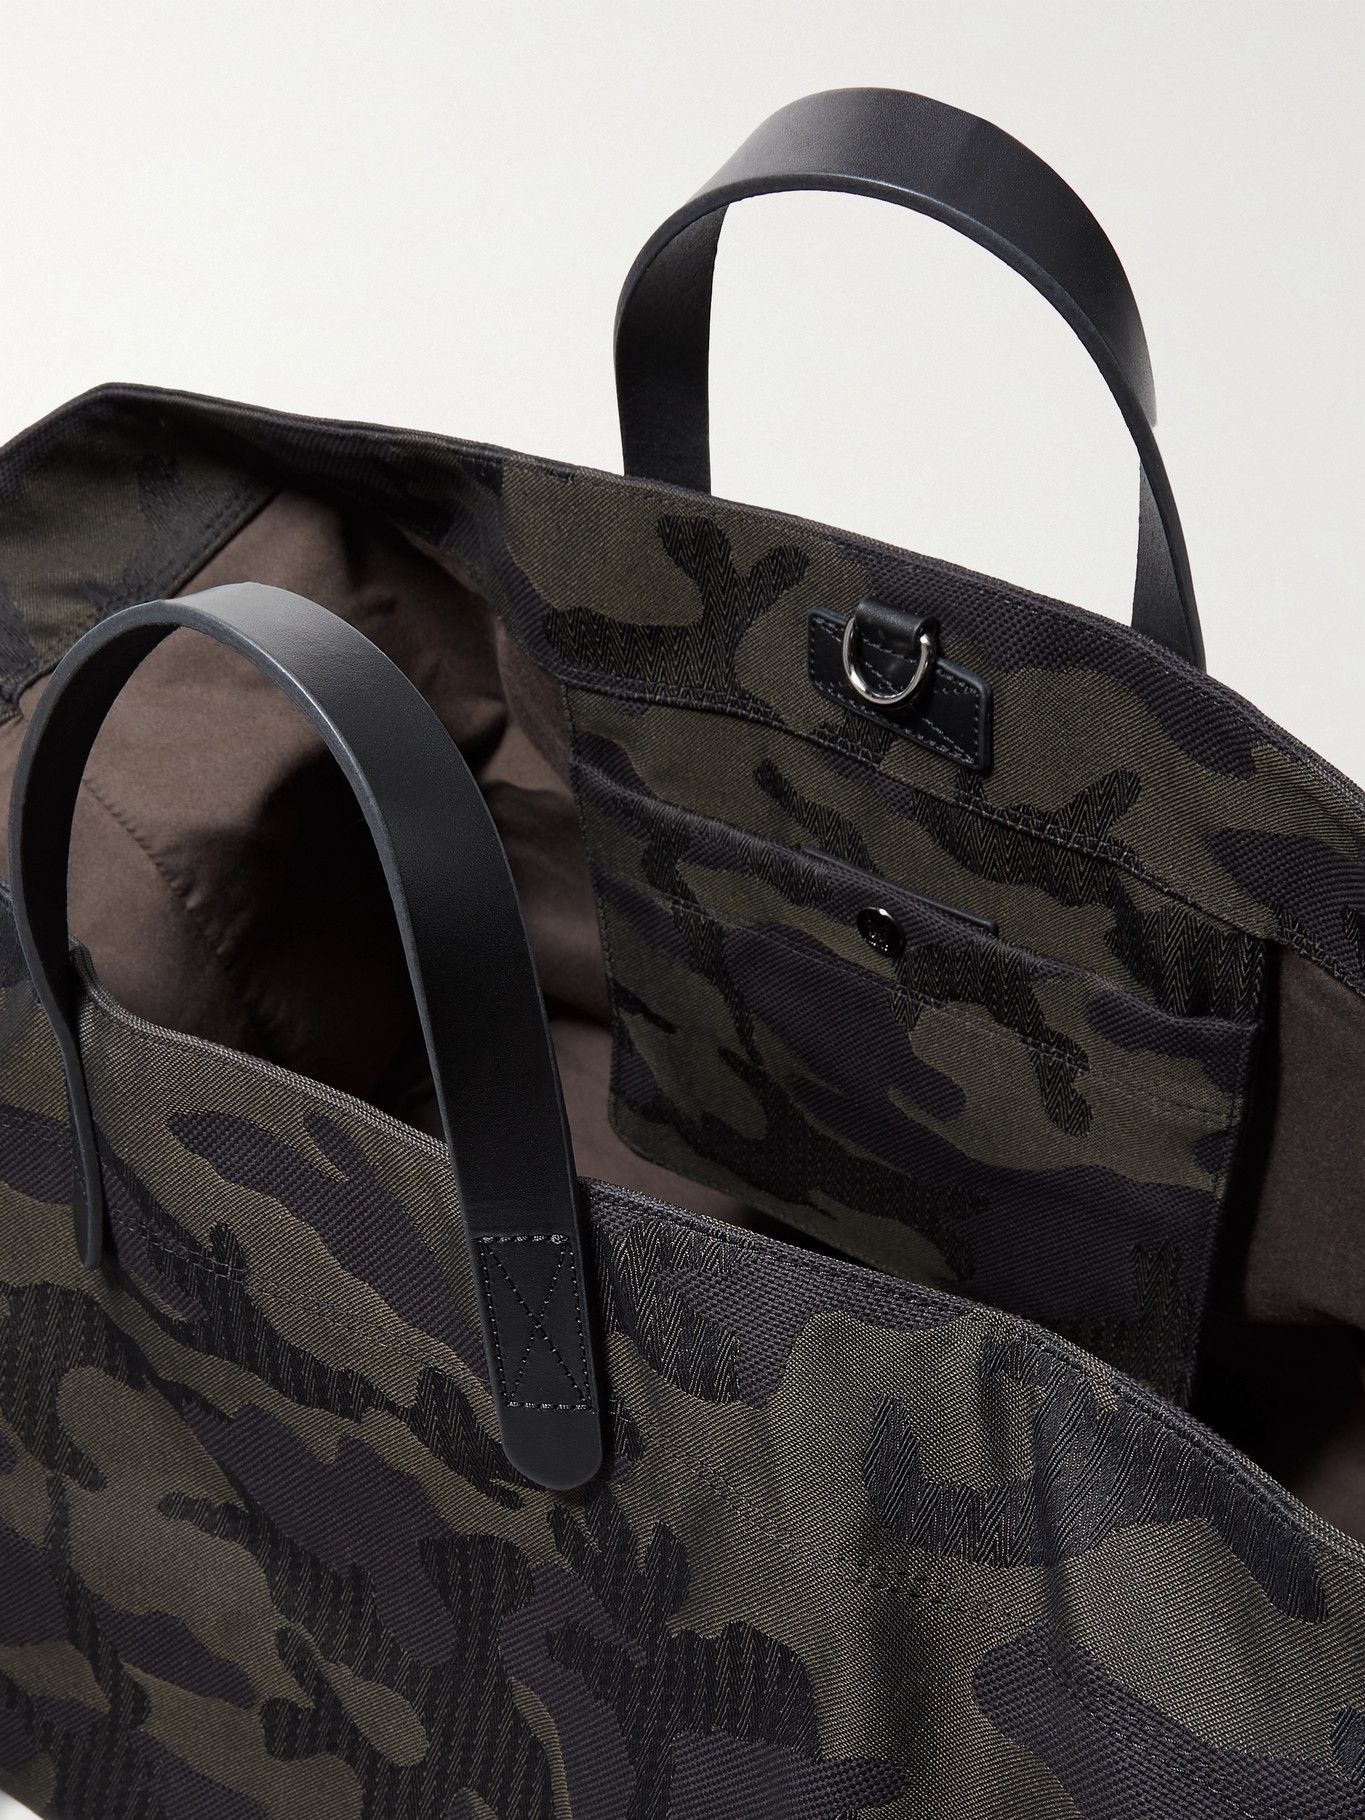 MISMO - Haven Leather-Trimmed Camouflage-Jacquard Tote Bag Mismo